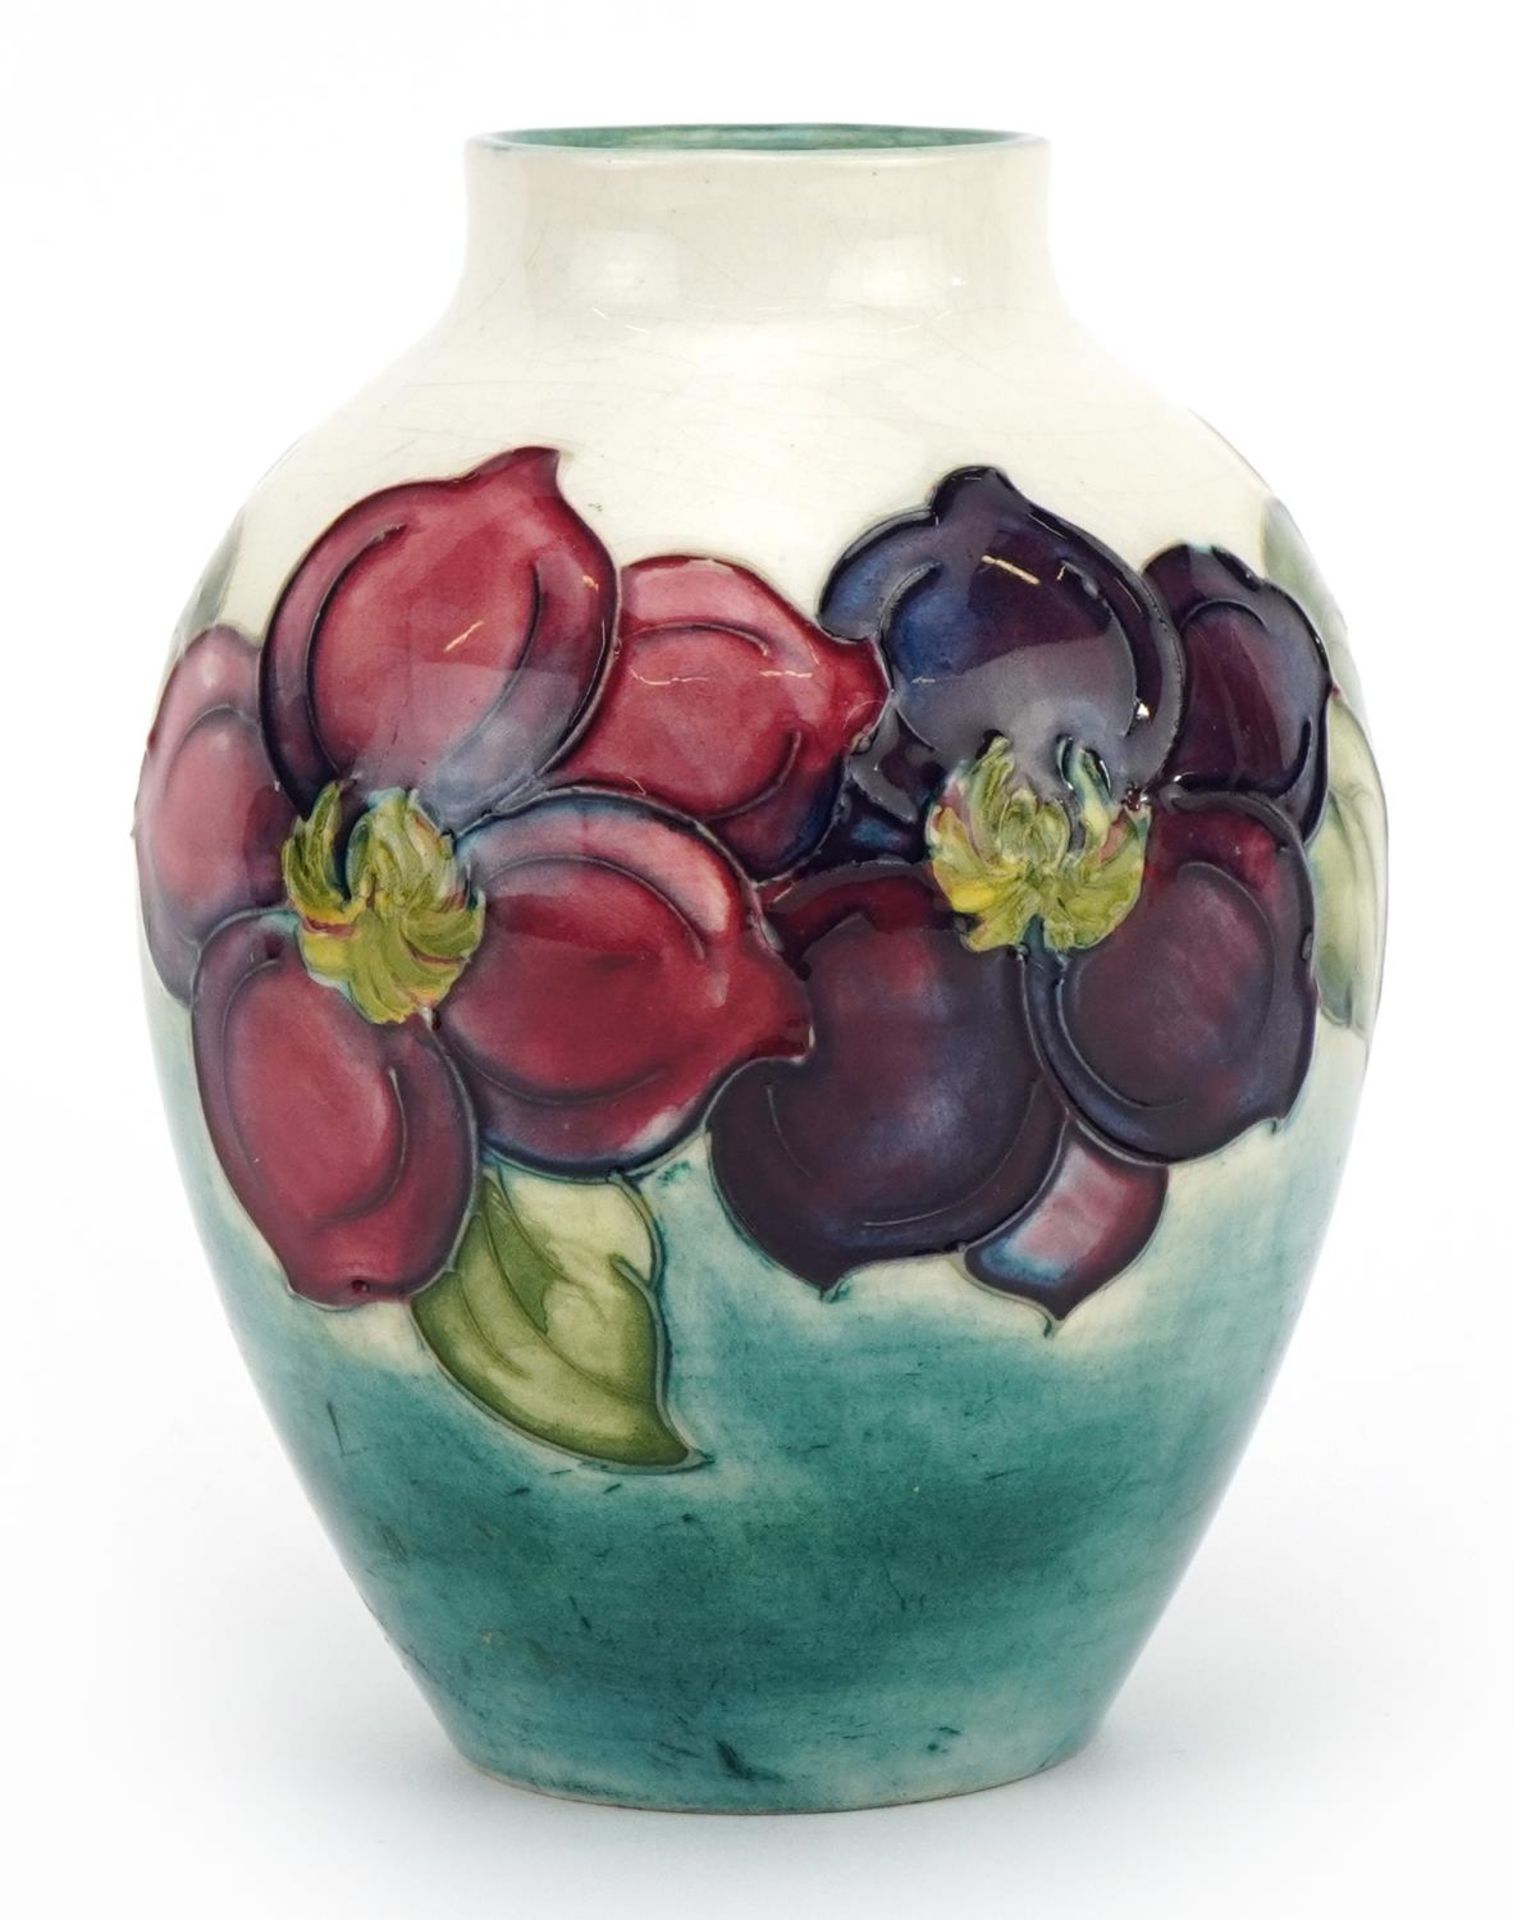 Moorcroft Pottery vase hand painted with flowers, 12.5cm high